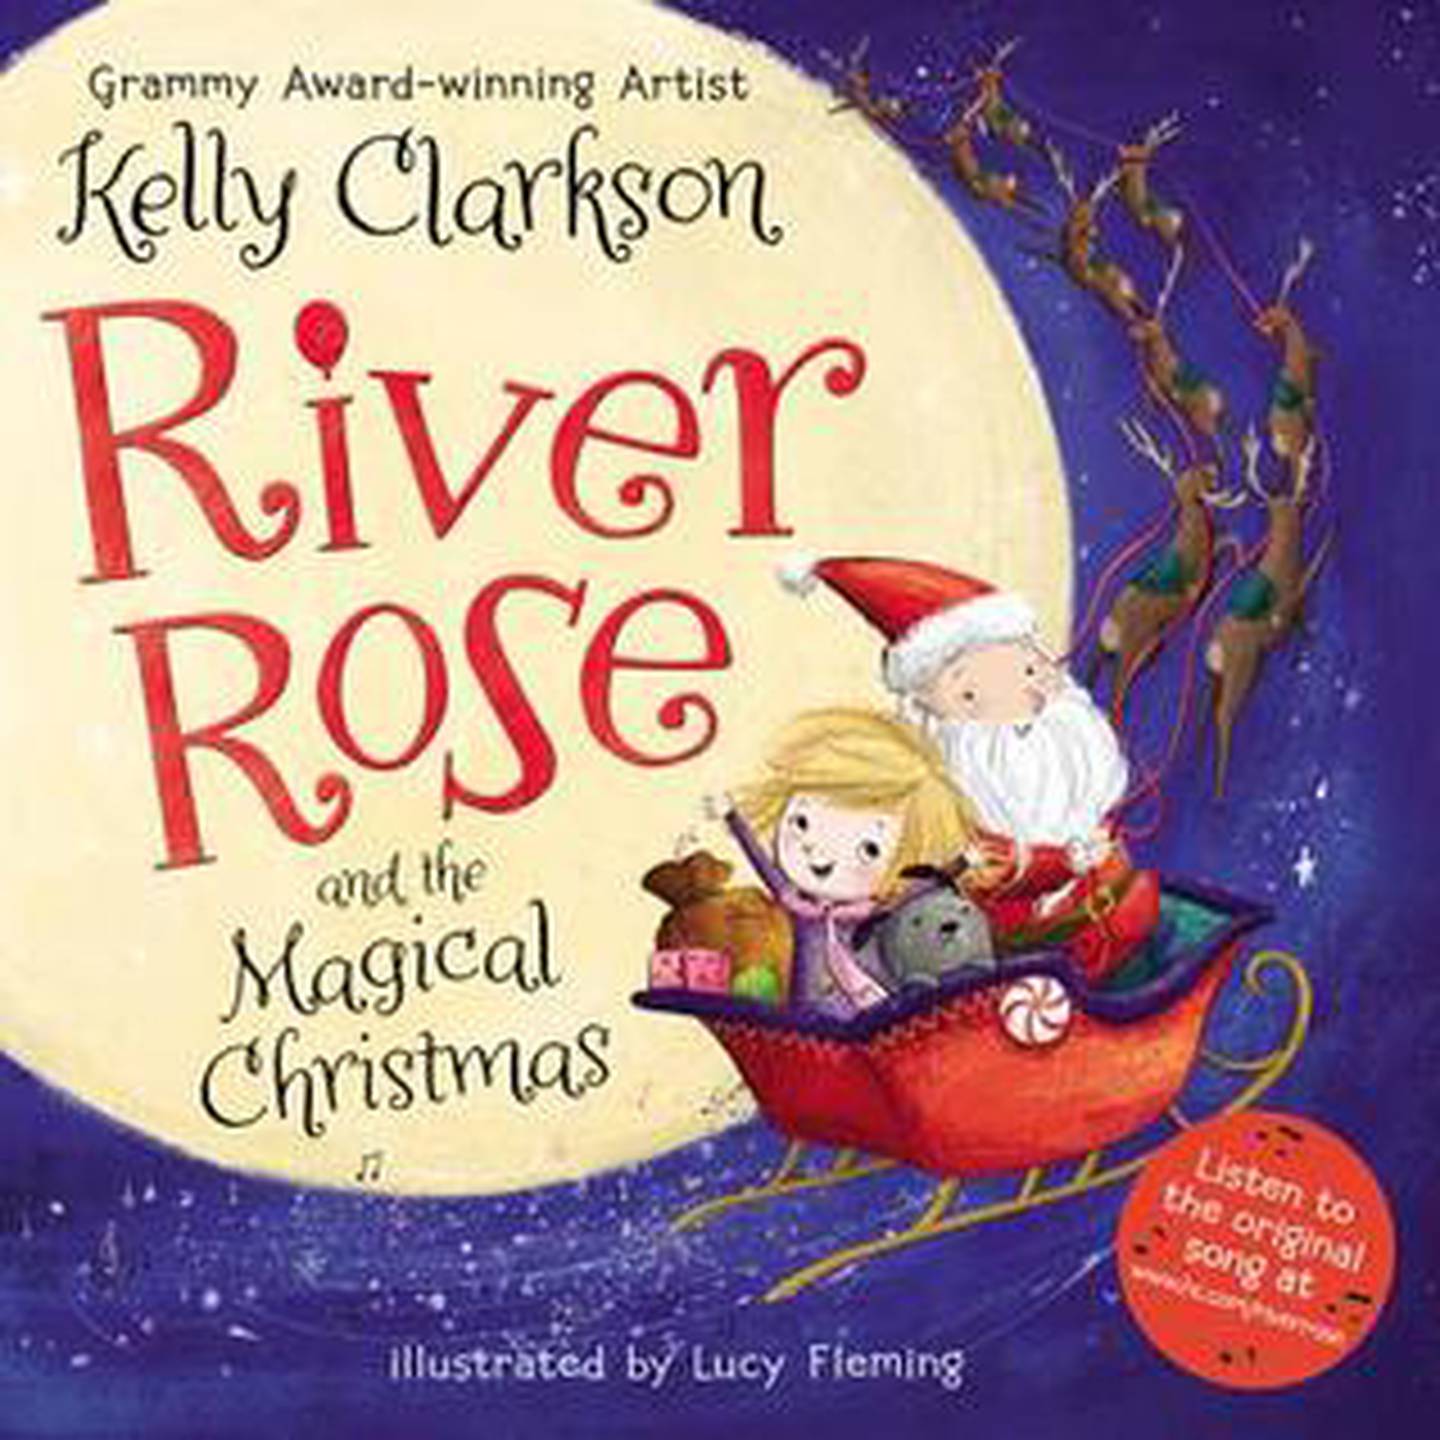 'River Rose and the Magical Christmas' by Kelly Clarkson